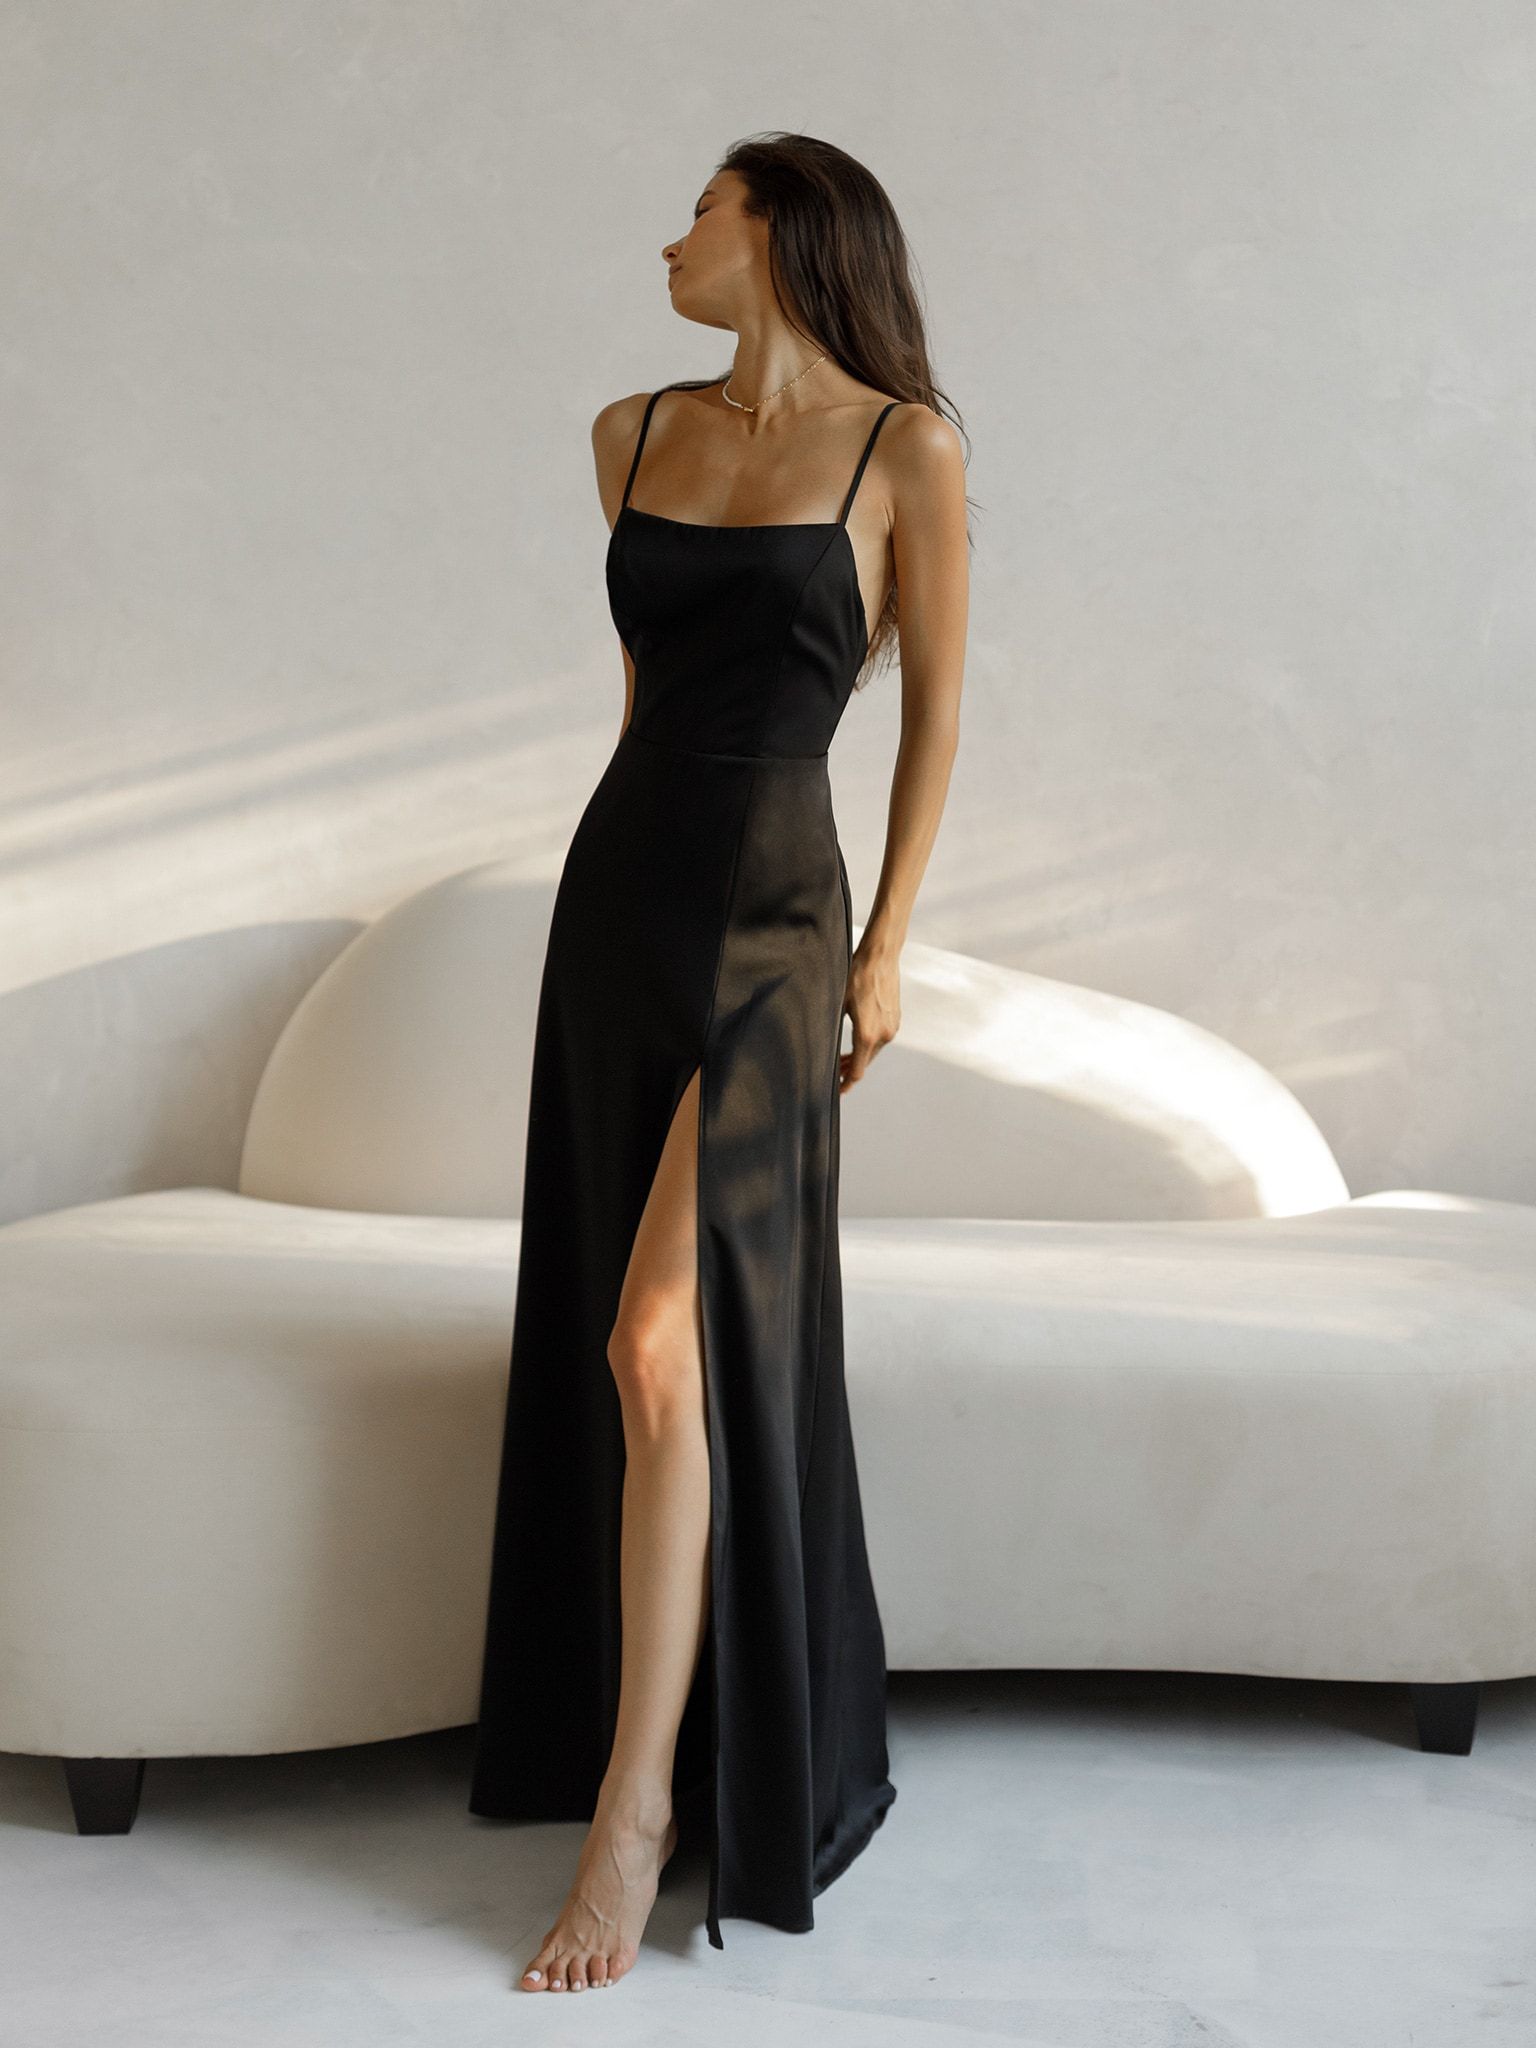 Sleek and Sultry: Embrace Boldness with a Slit Dress